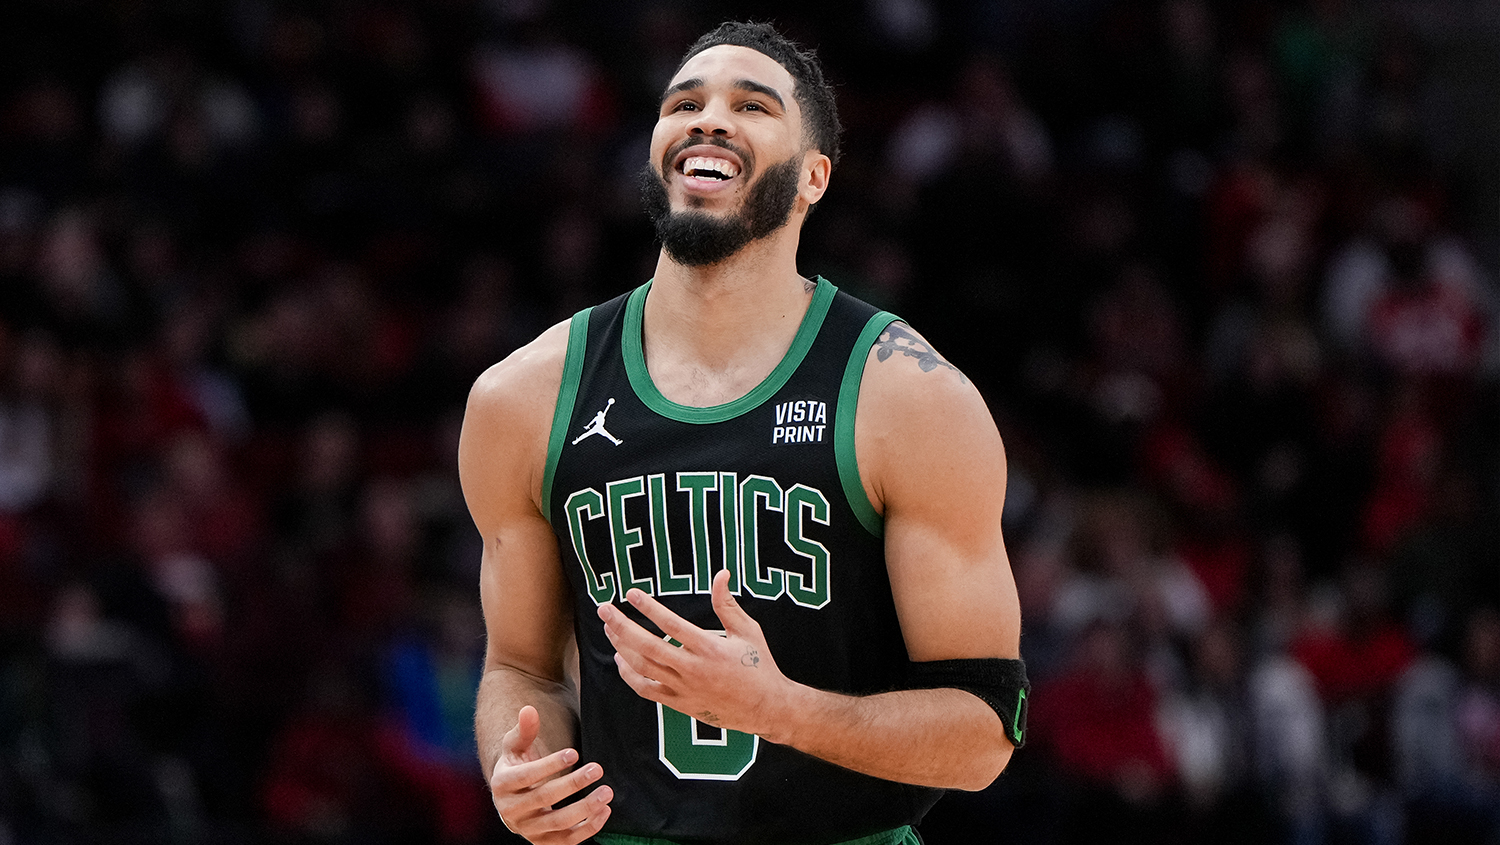 SoFi And Jayson Tatum Partner To Establish $1M Fund That Will Help Individuals Become Homeowners